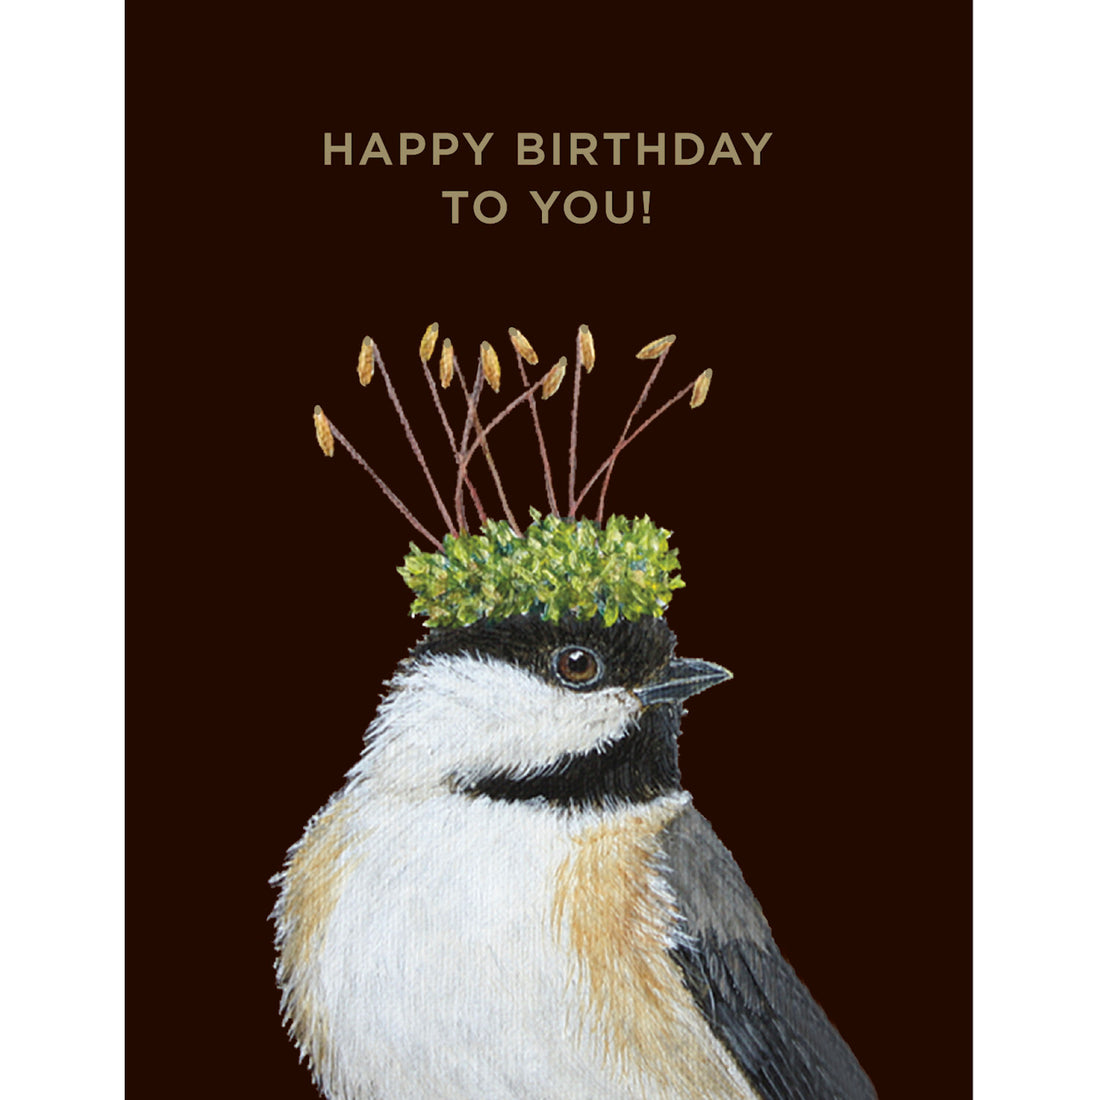 A Hester &amp; Cook Birthday Chickadee Card with a chickadee wearing a crown of plants.